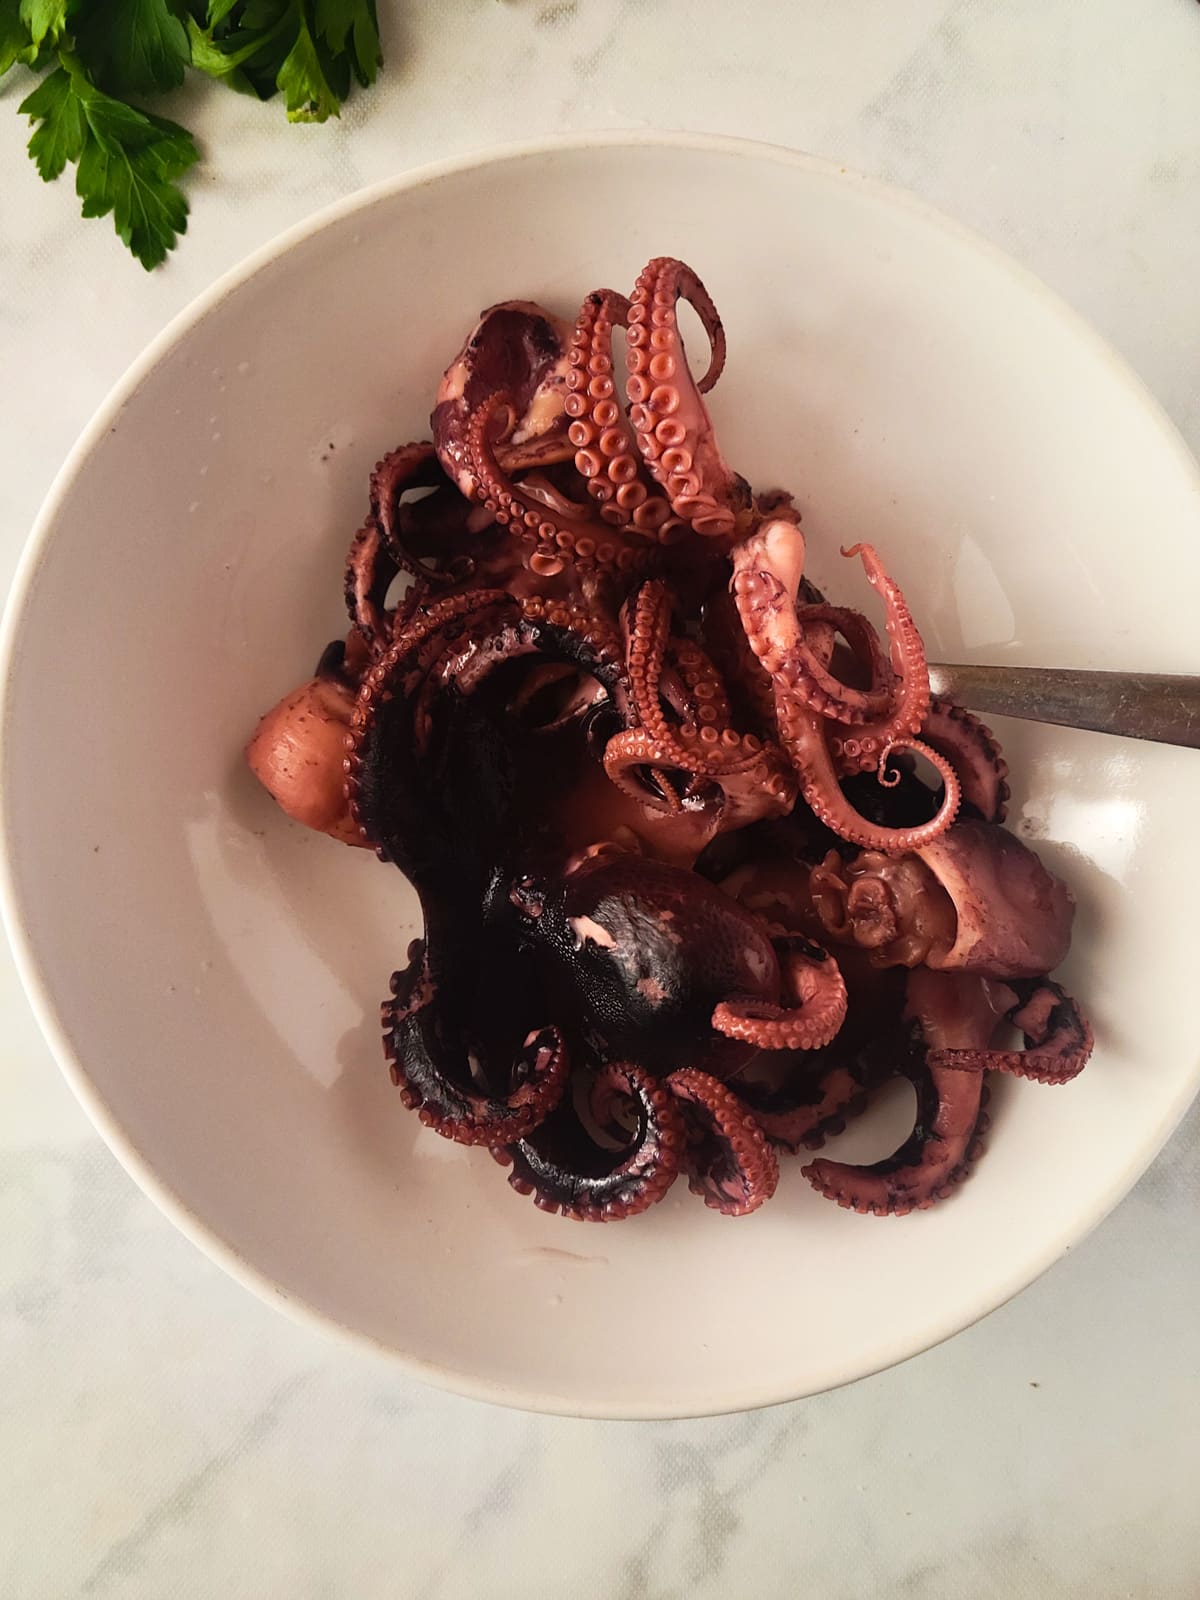 The cooked octopus in a white bowl.